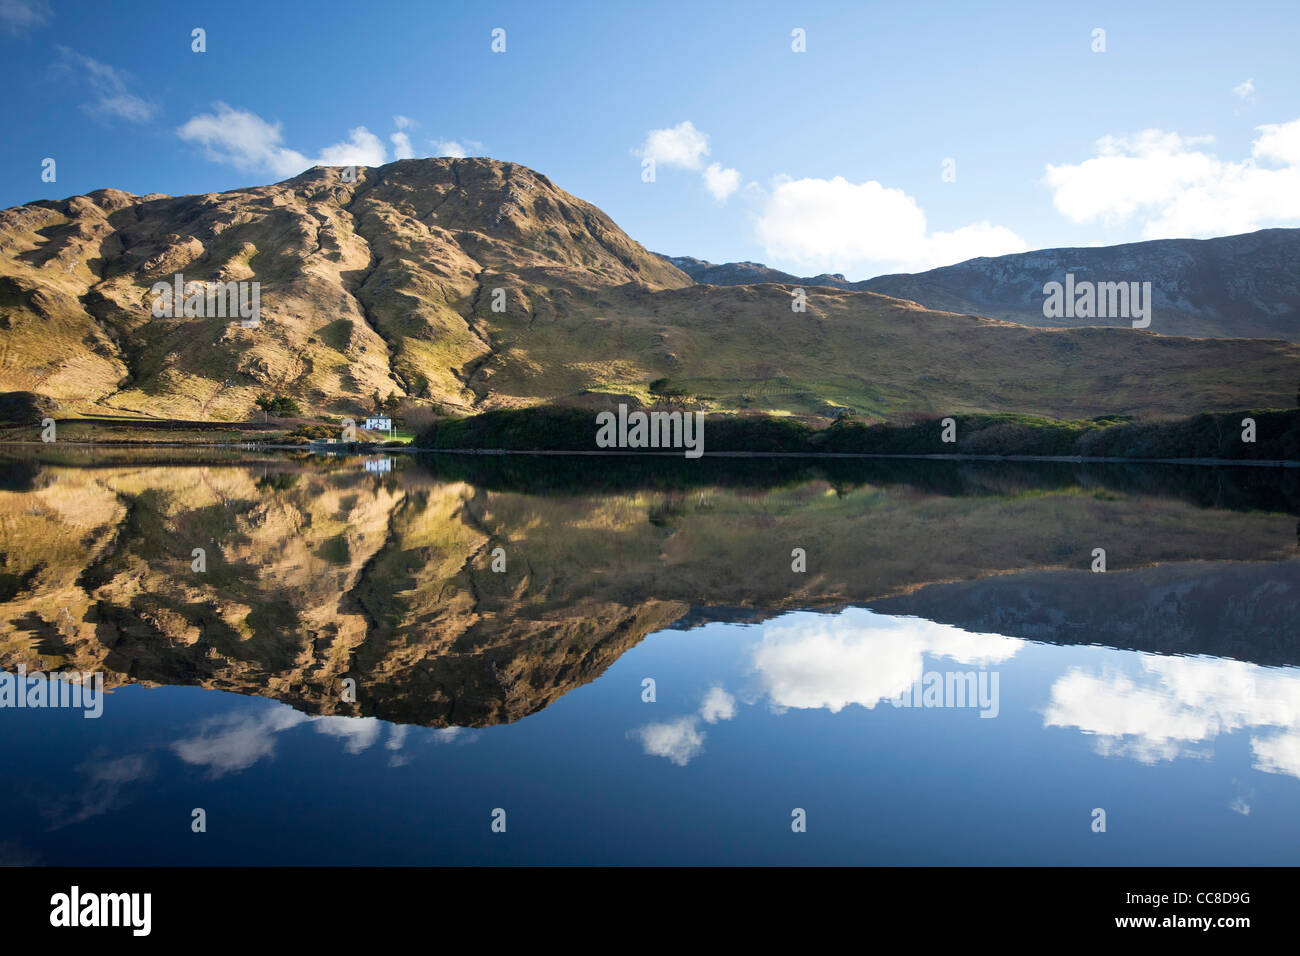 Evening reflection of the Twelve Bens Mountains in Kylemore Lough, Connemara, County Galway, Ireland. Stock Photo